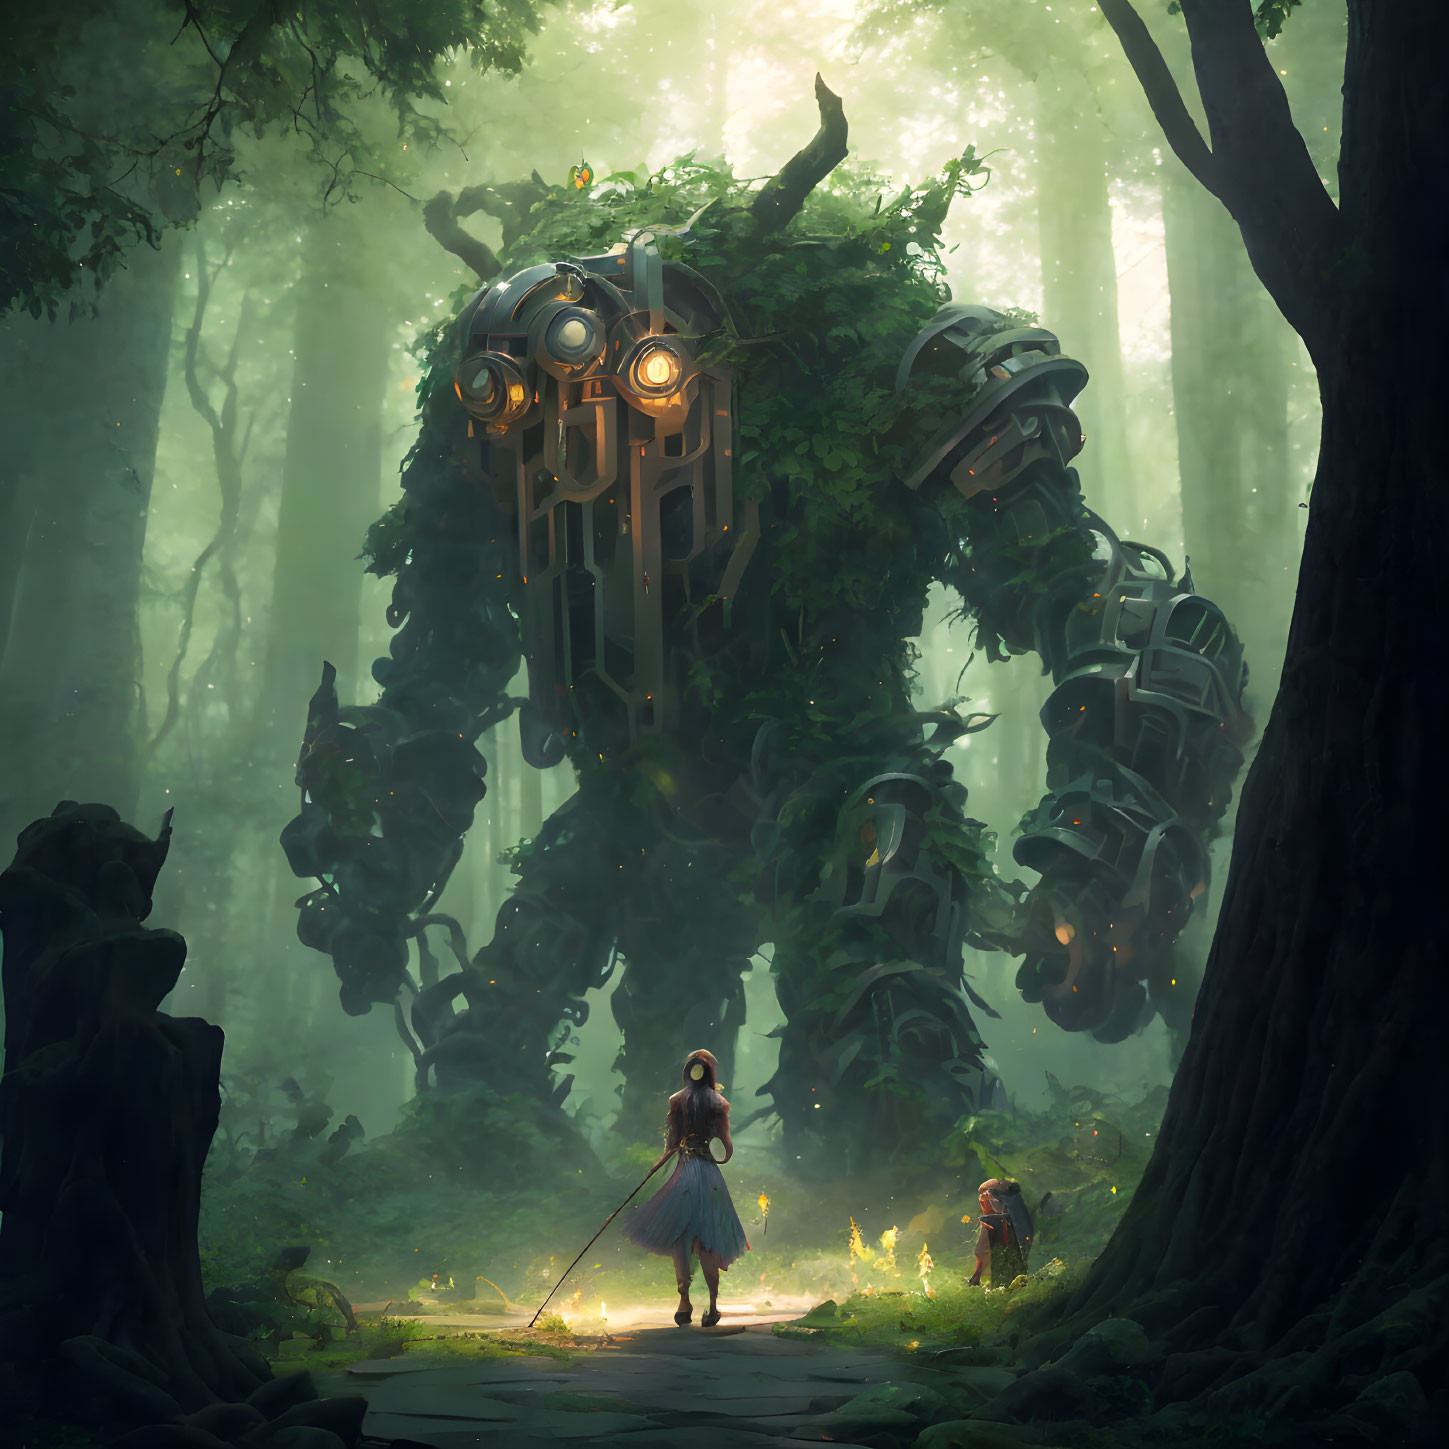 Mystical forest scene with giant robot, young girl, and luminous creatures